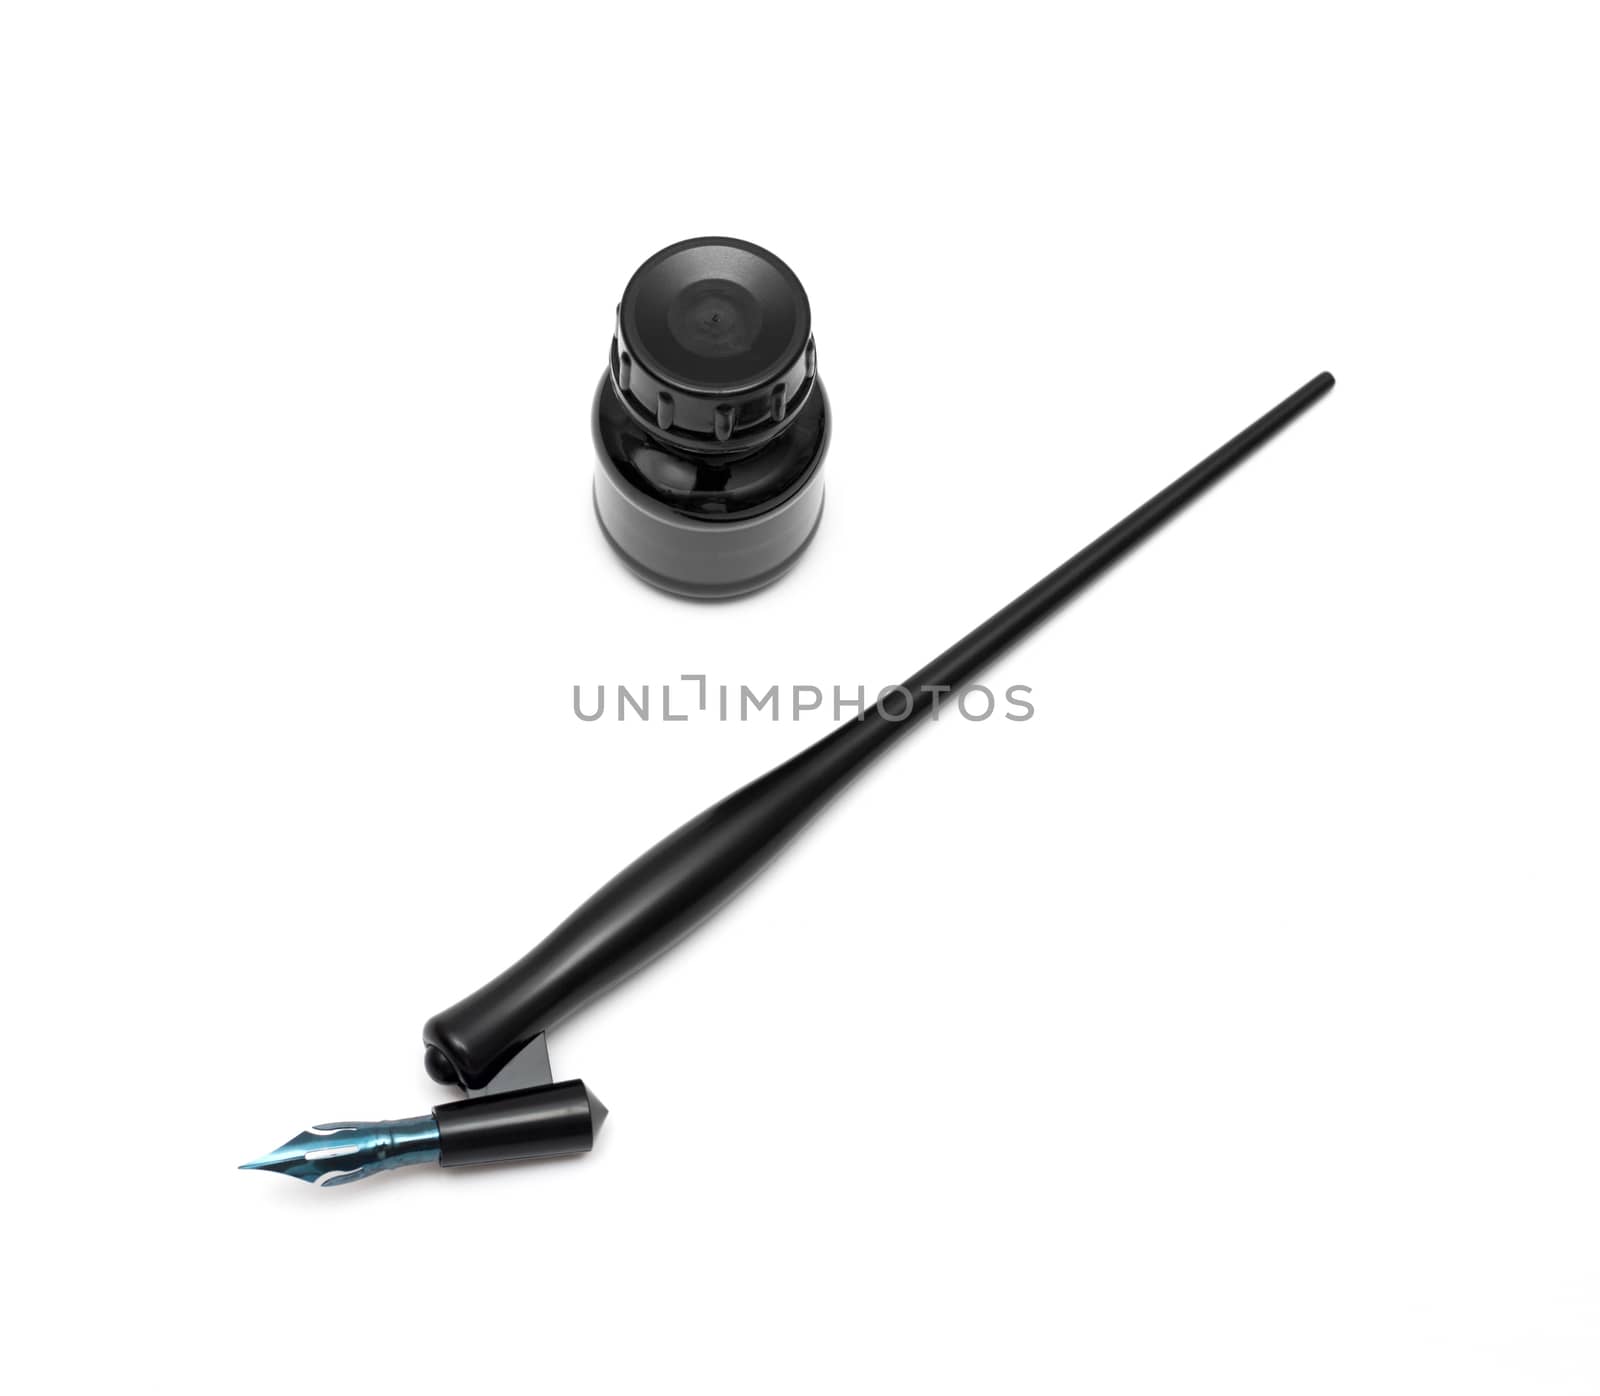 calligraphy pen isolated on white background